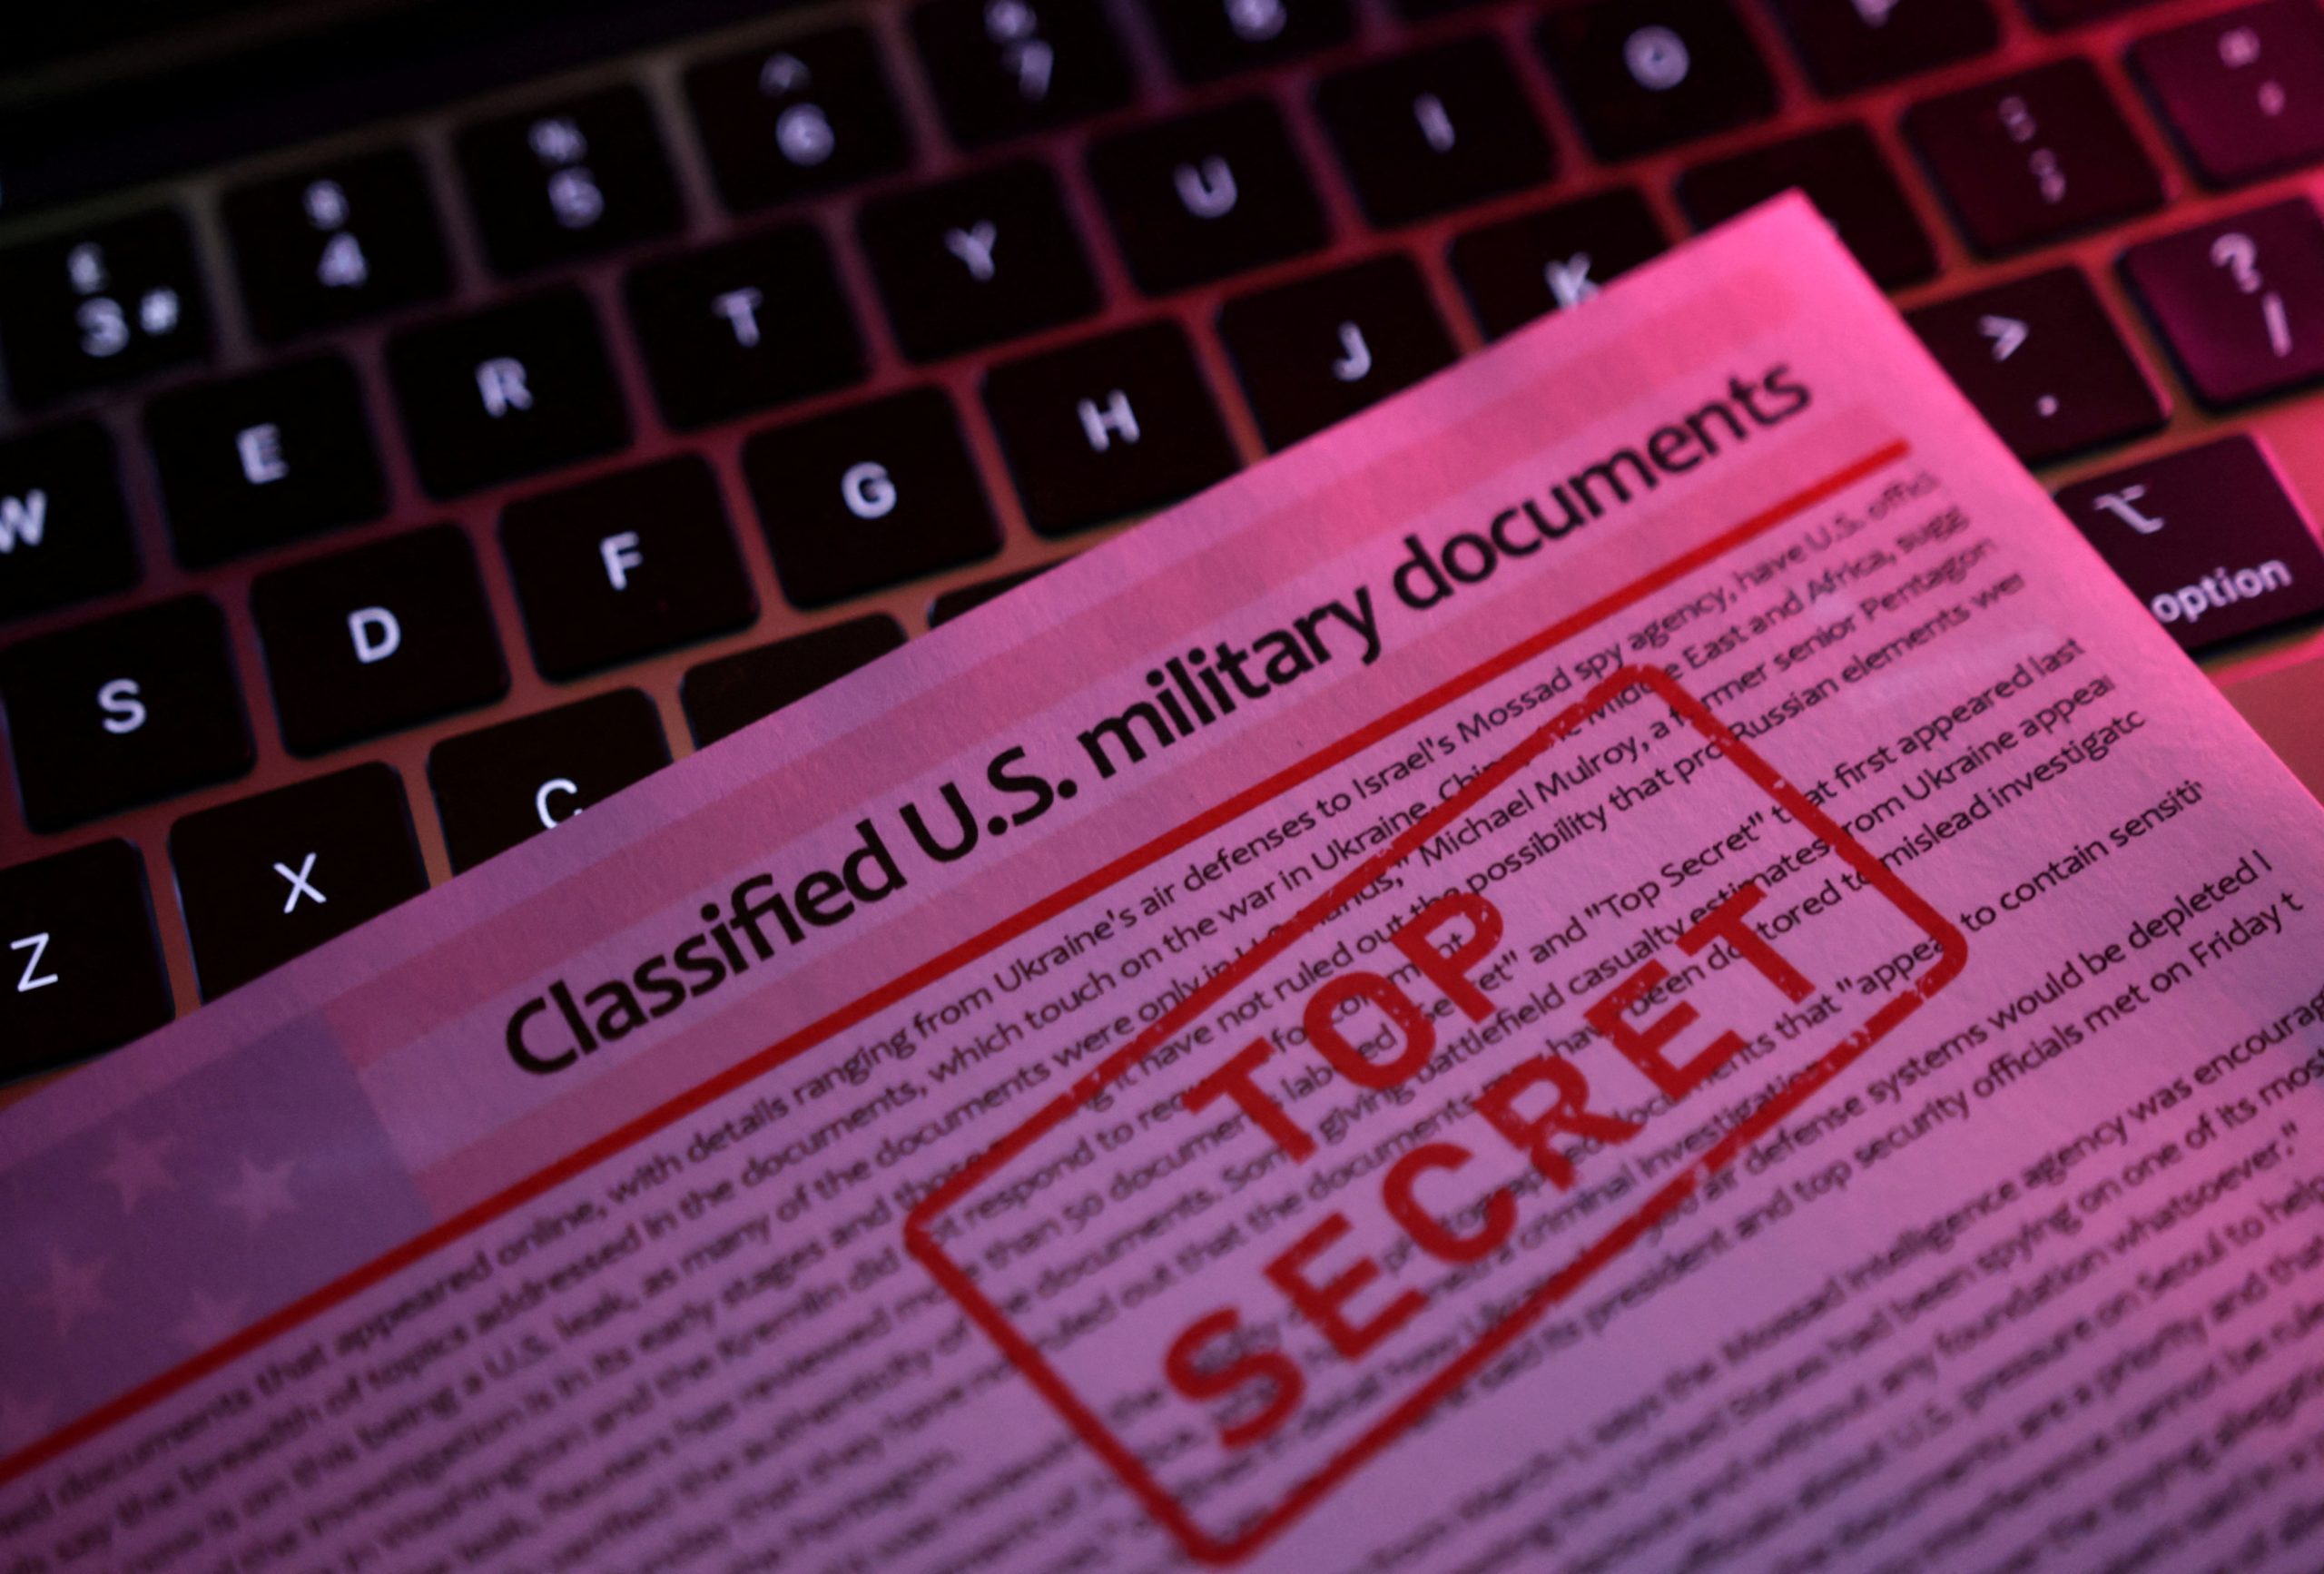 Pentagon’s Security Policy Changes: A Response to Classified Document Leaks